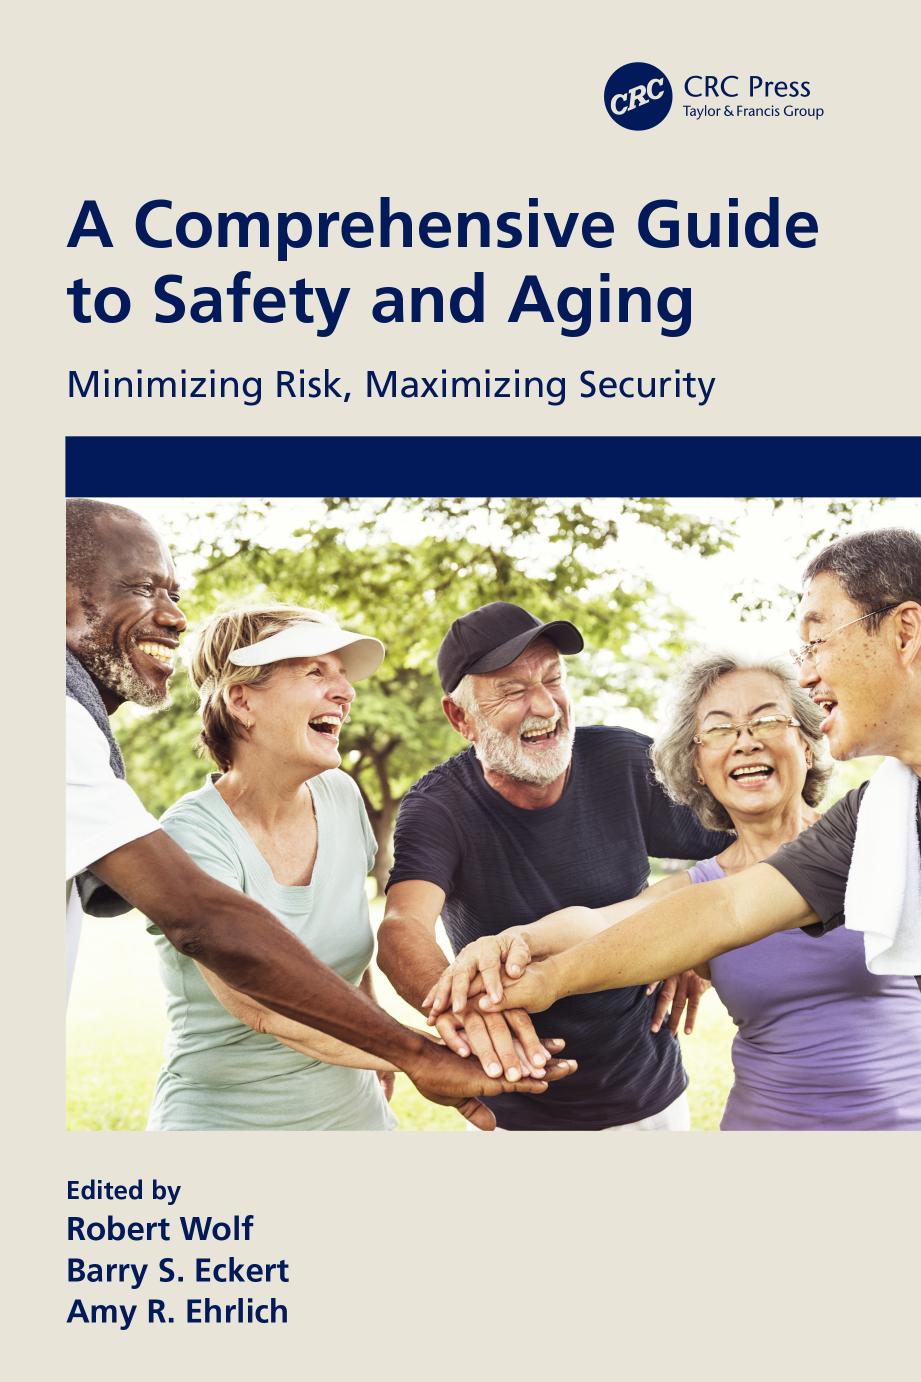 A Comprehensive Guide to Safety and Aging: Minimizing Risk, Maximizing Security by Barry S. Eckert Robert Wolf Amy R. Ehrlich